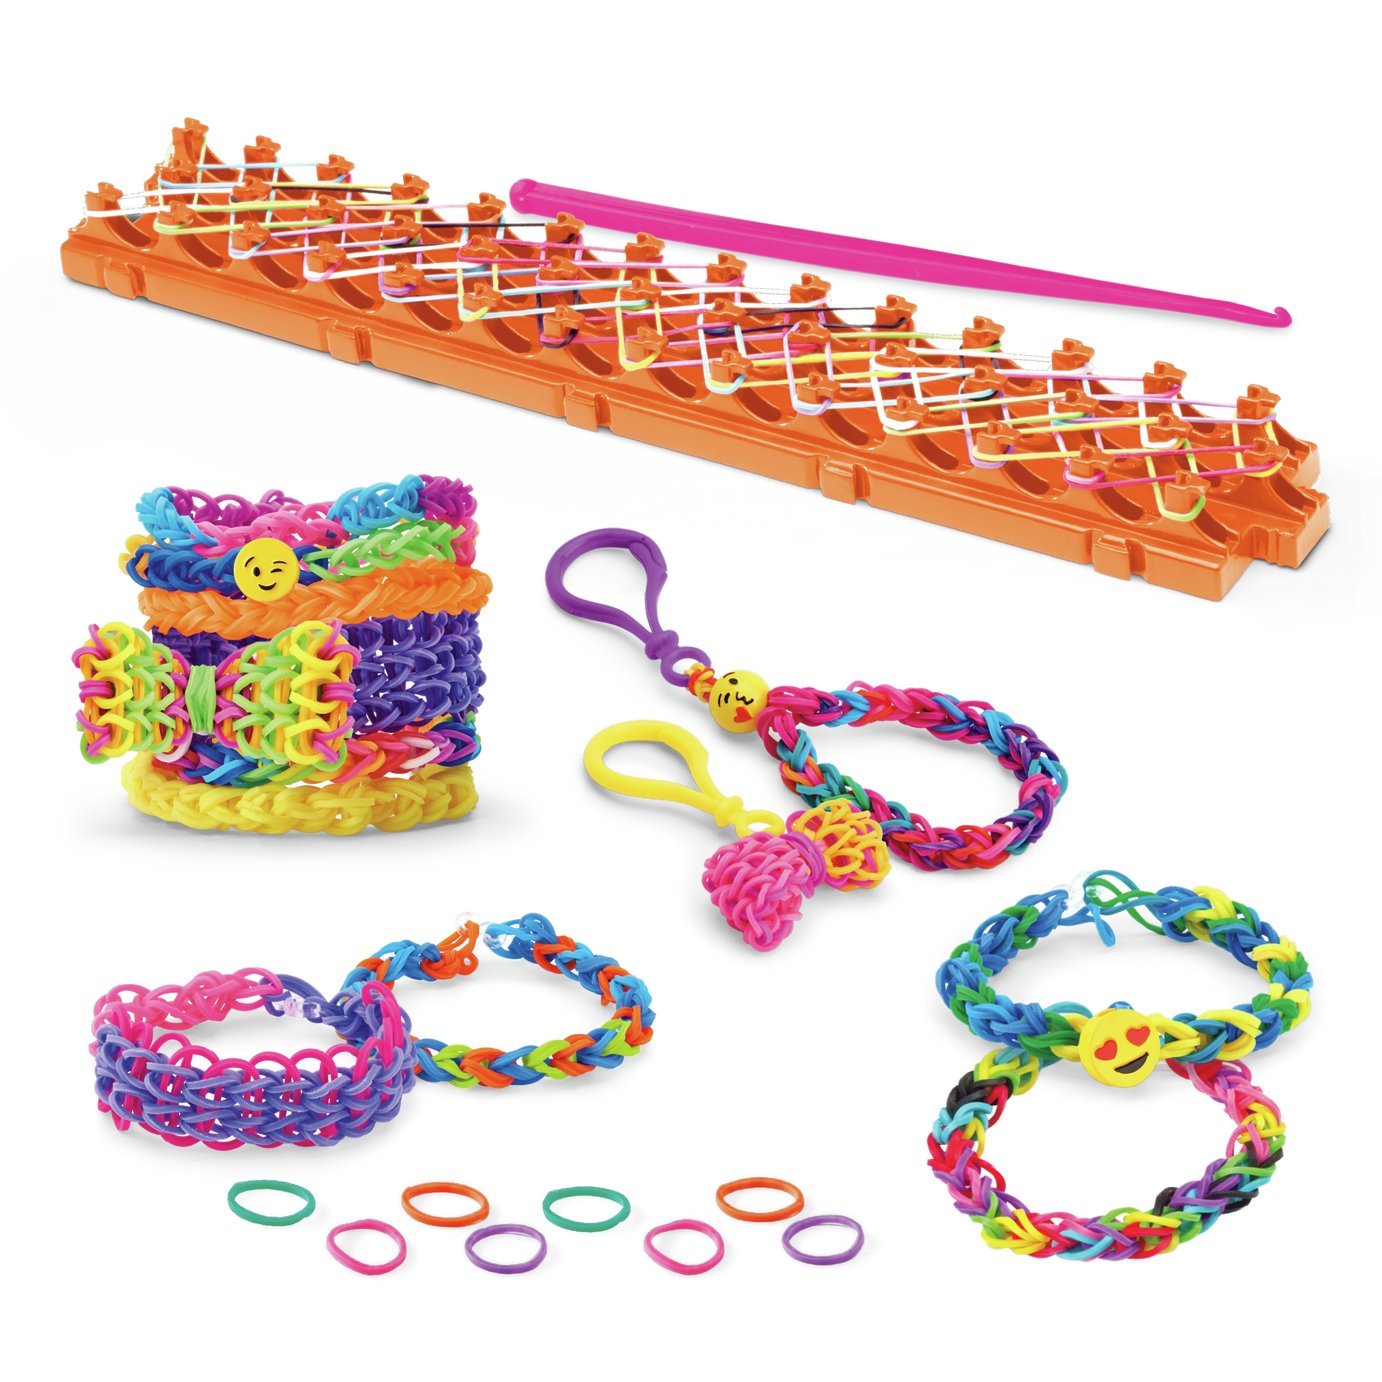 Cra-Z-Loom Band Maker Review